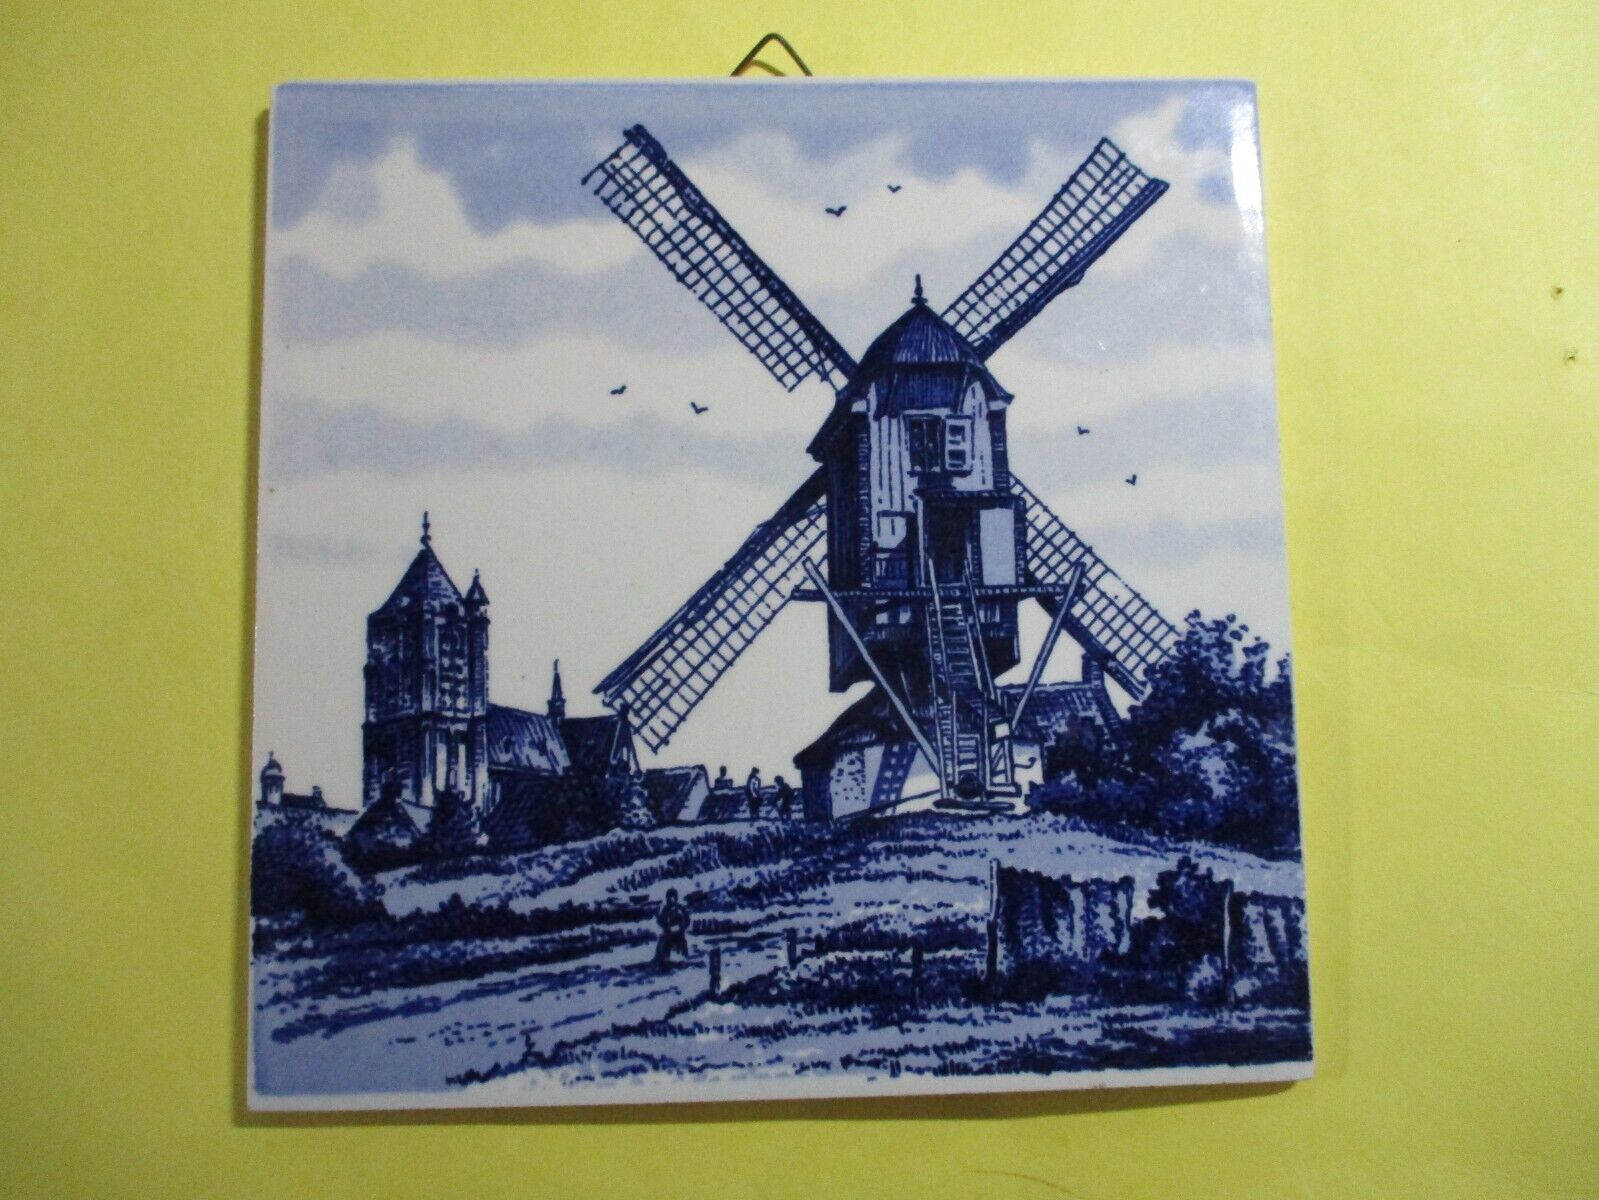 Vtg Delft Style Hand Painted Ceramic Tile Blue & White Windmill Fields Farmers